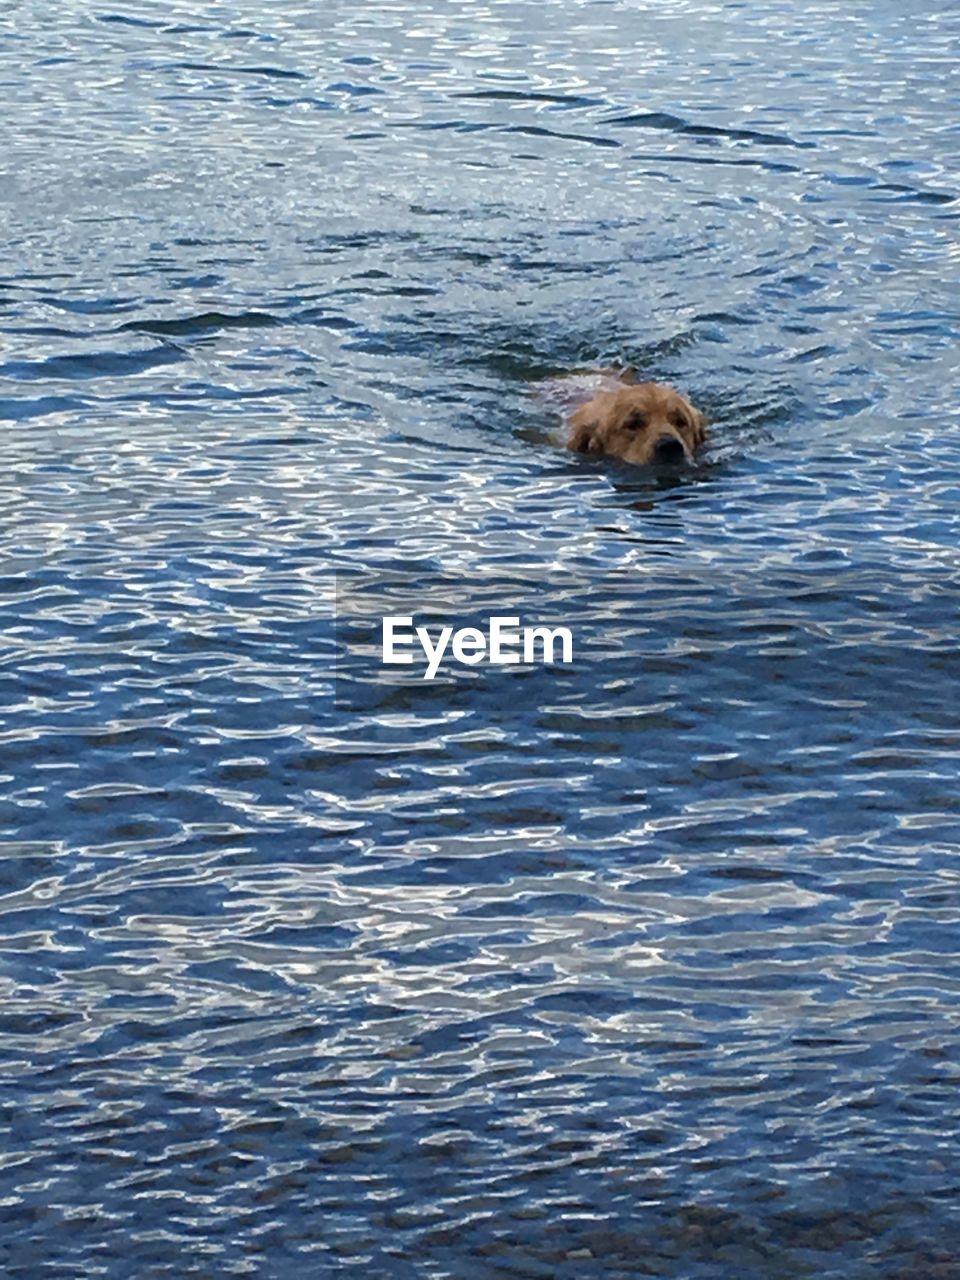 DOG SWIMMING ON WATER